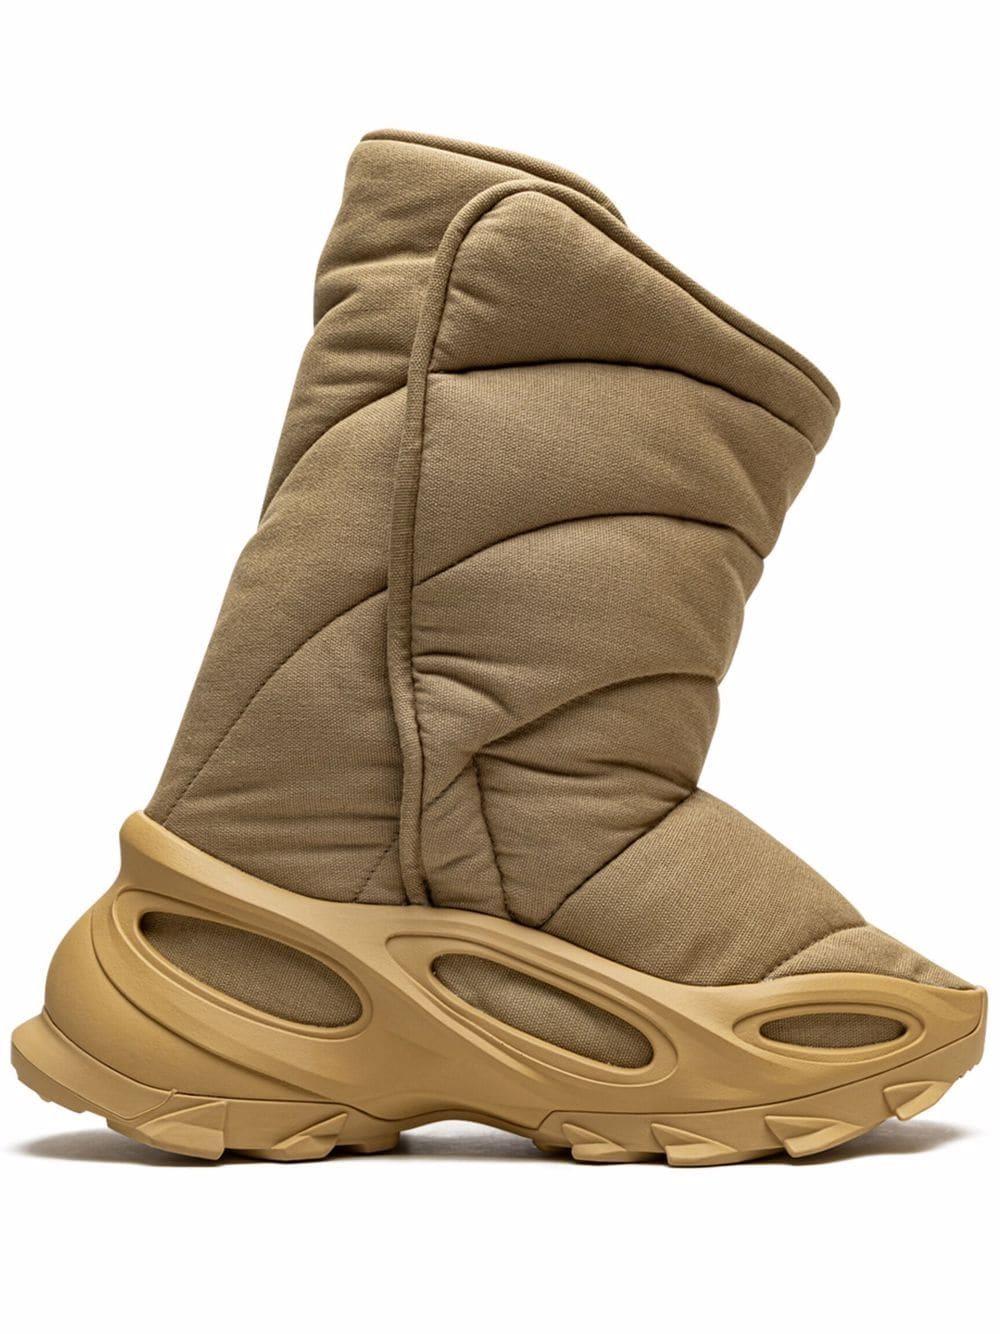 Yeezy Yeezy Insulated Boots for Men | Lyst